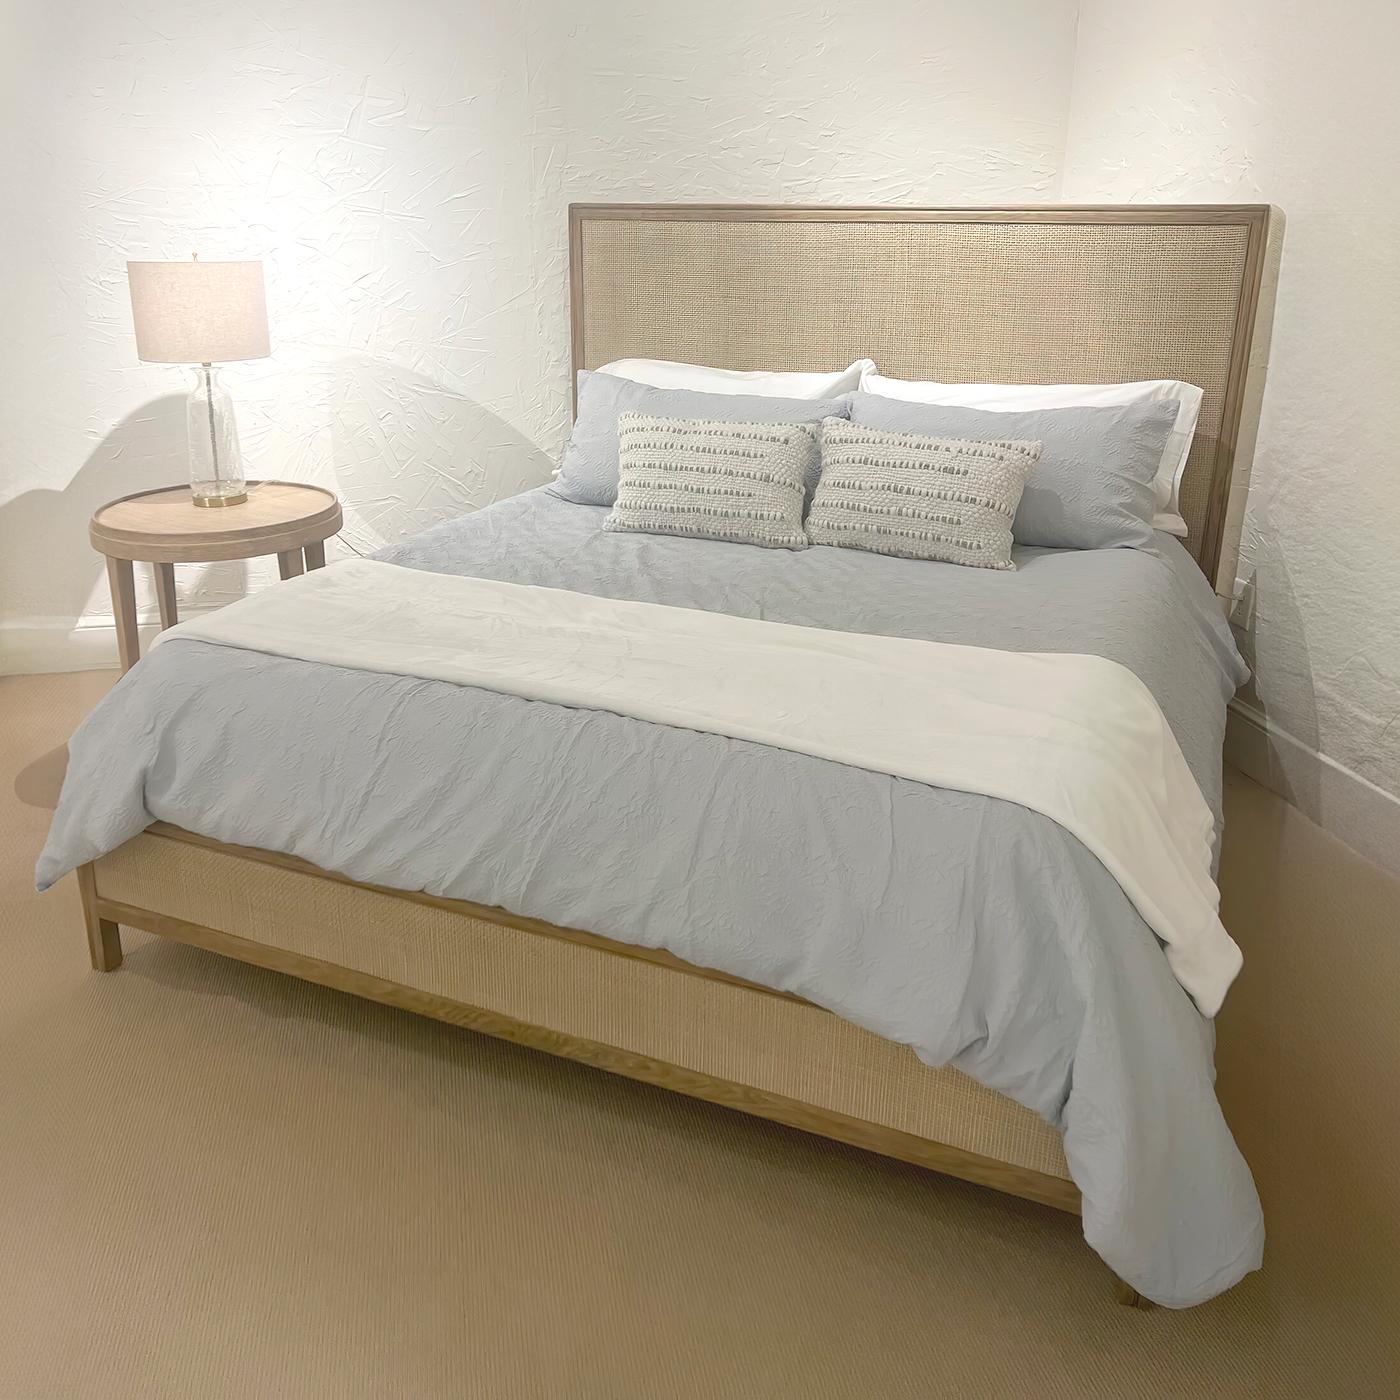 The Modern Bed is designed to seamlessly blend with your personal style and preferences. The clean lines and light ceruse finish create a sense of serenity and balance, making it an ideal choice for creating a tranquil sleeping environment.

The